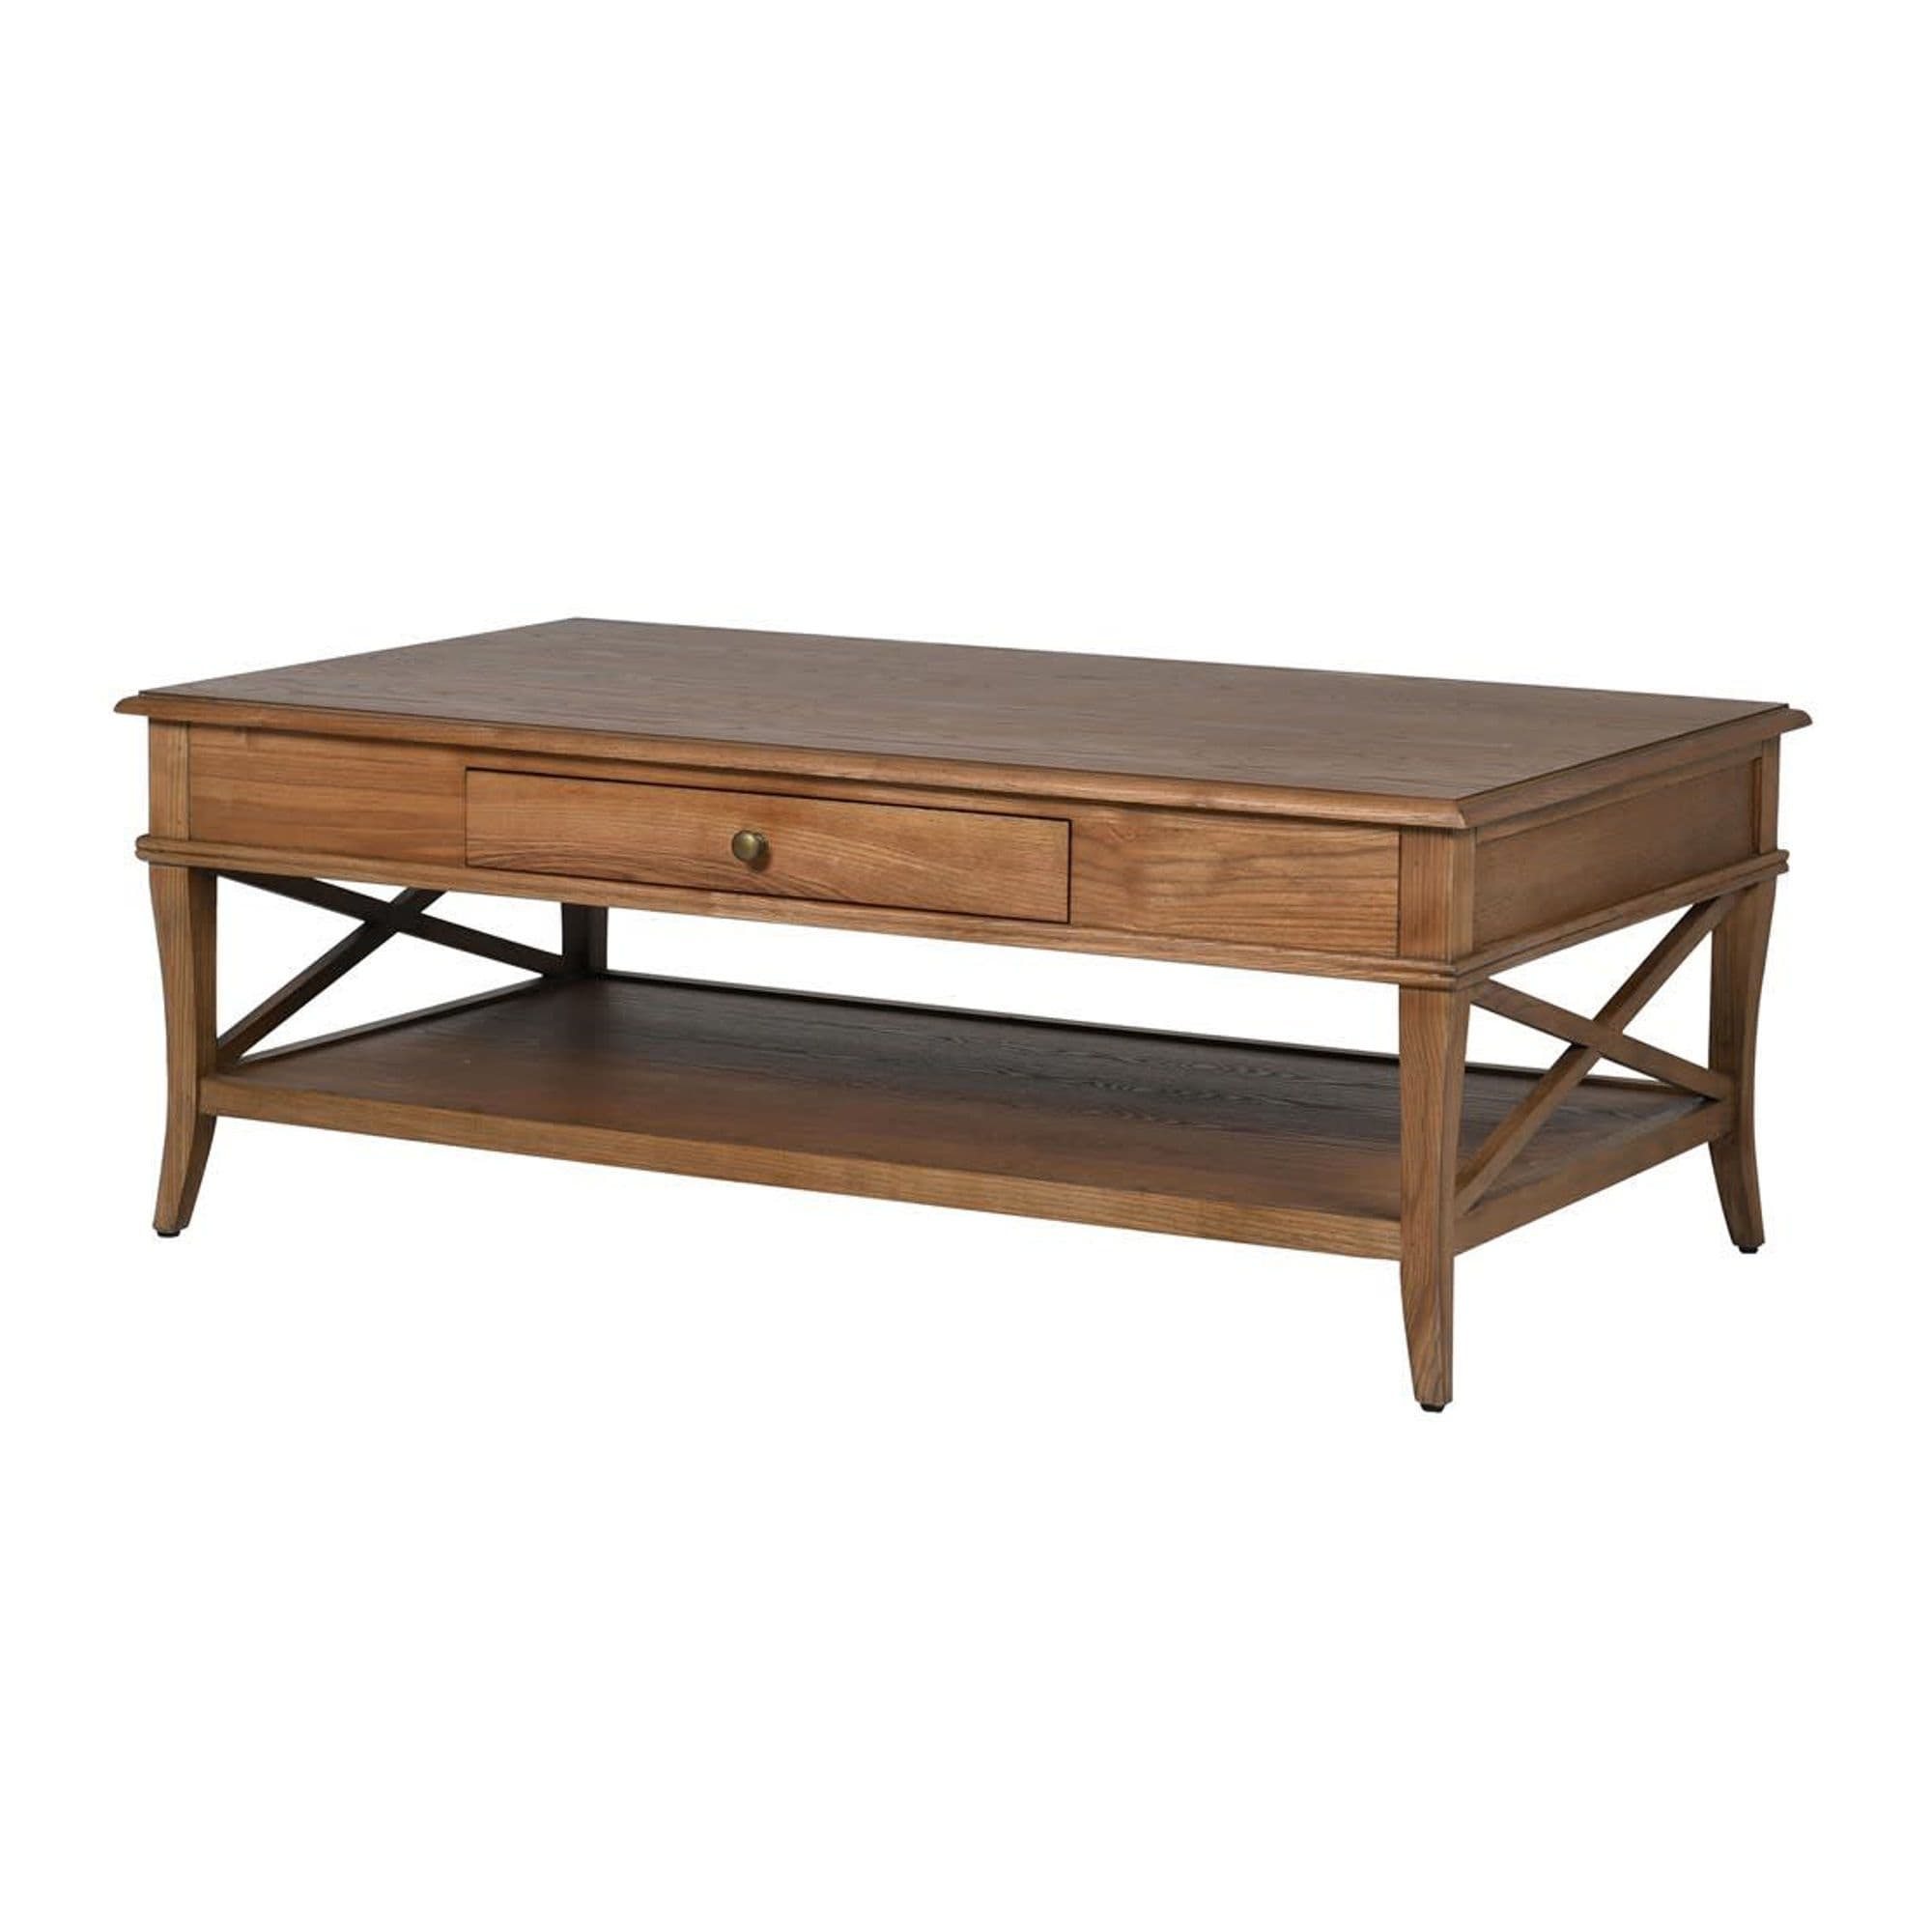 Classic Cross-Side Coffee Table - escapologyhome.co.uk